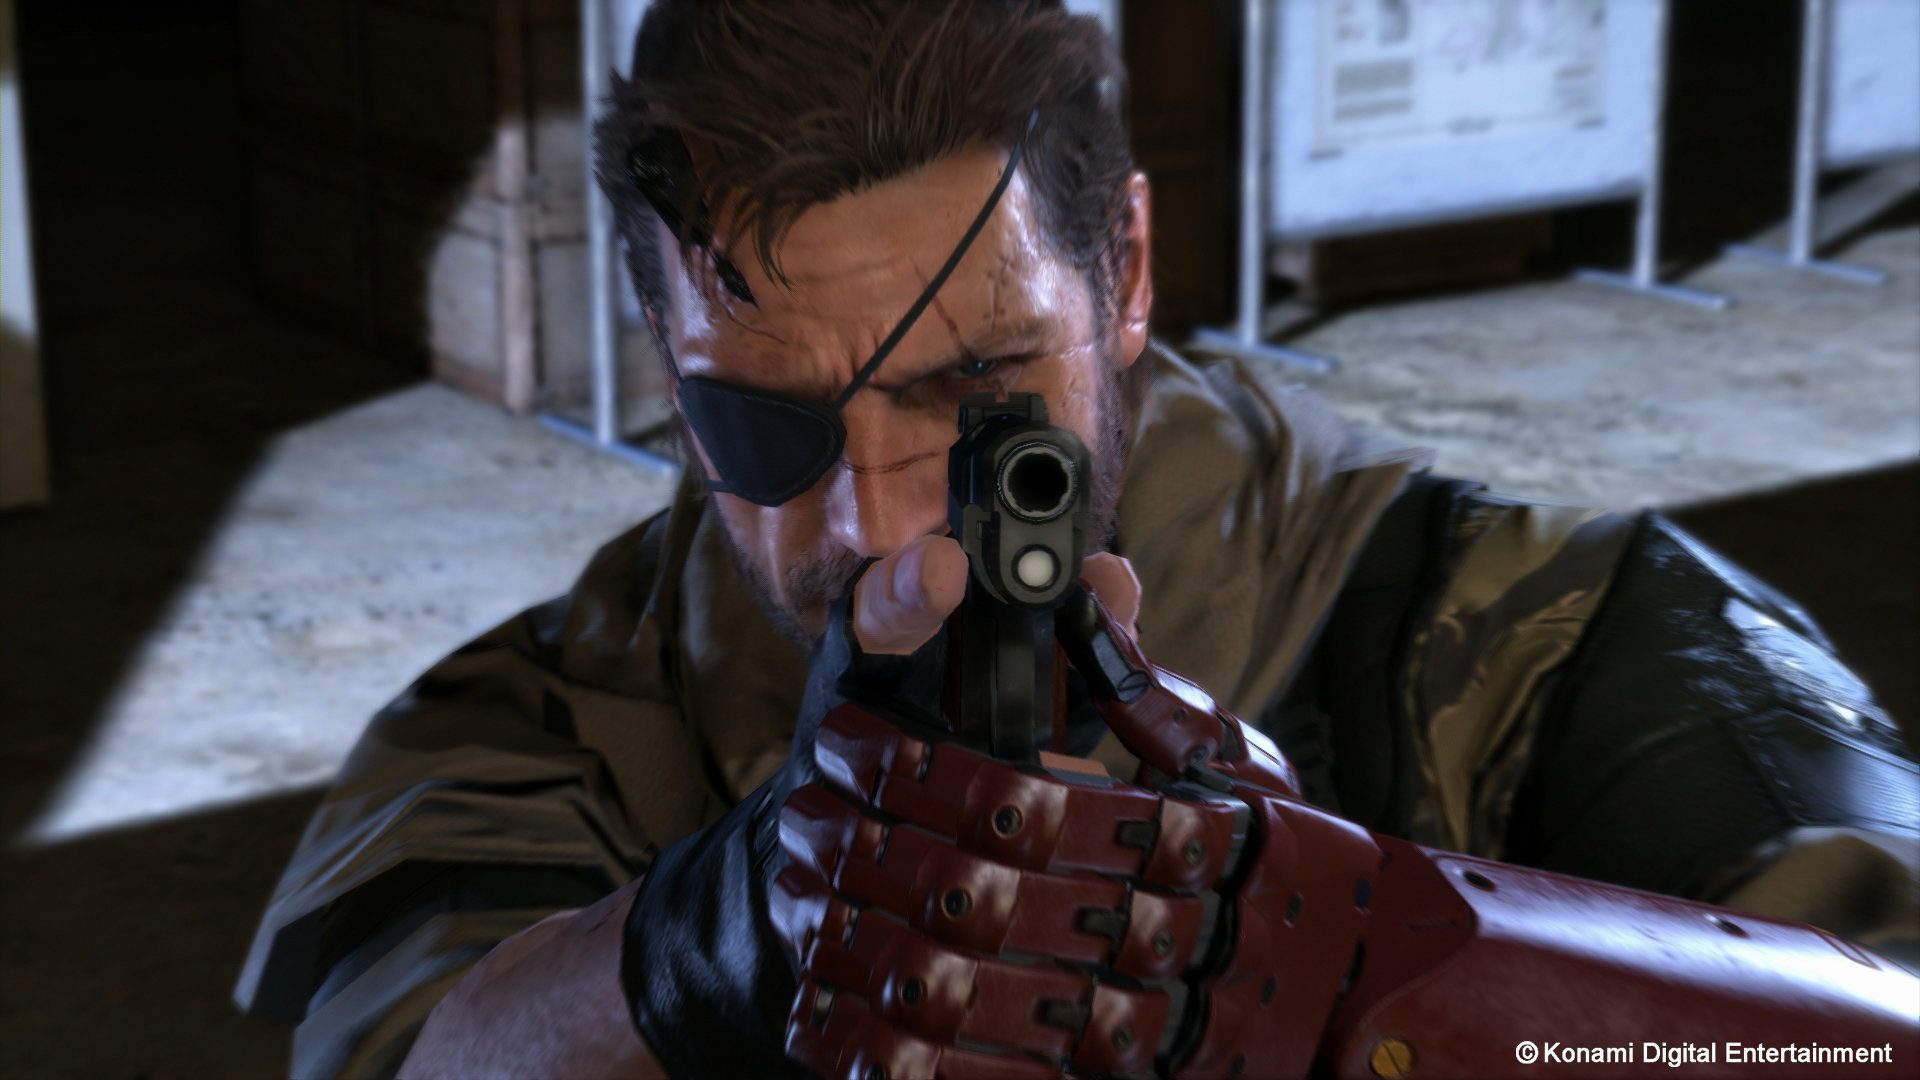 Awesome Metal Gear Solid 5 (V): The Phantom Pain (MGSV 5) free background ID:460342 for 1080p desktop